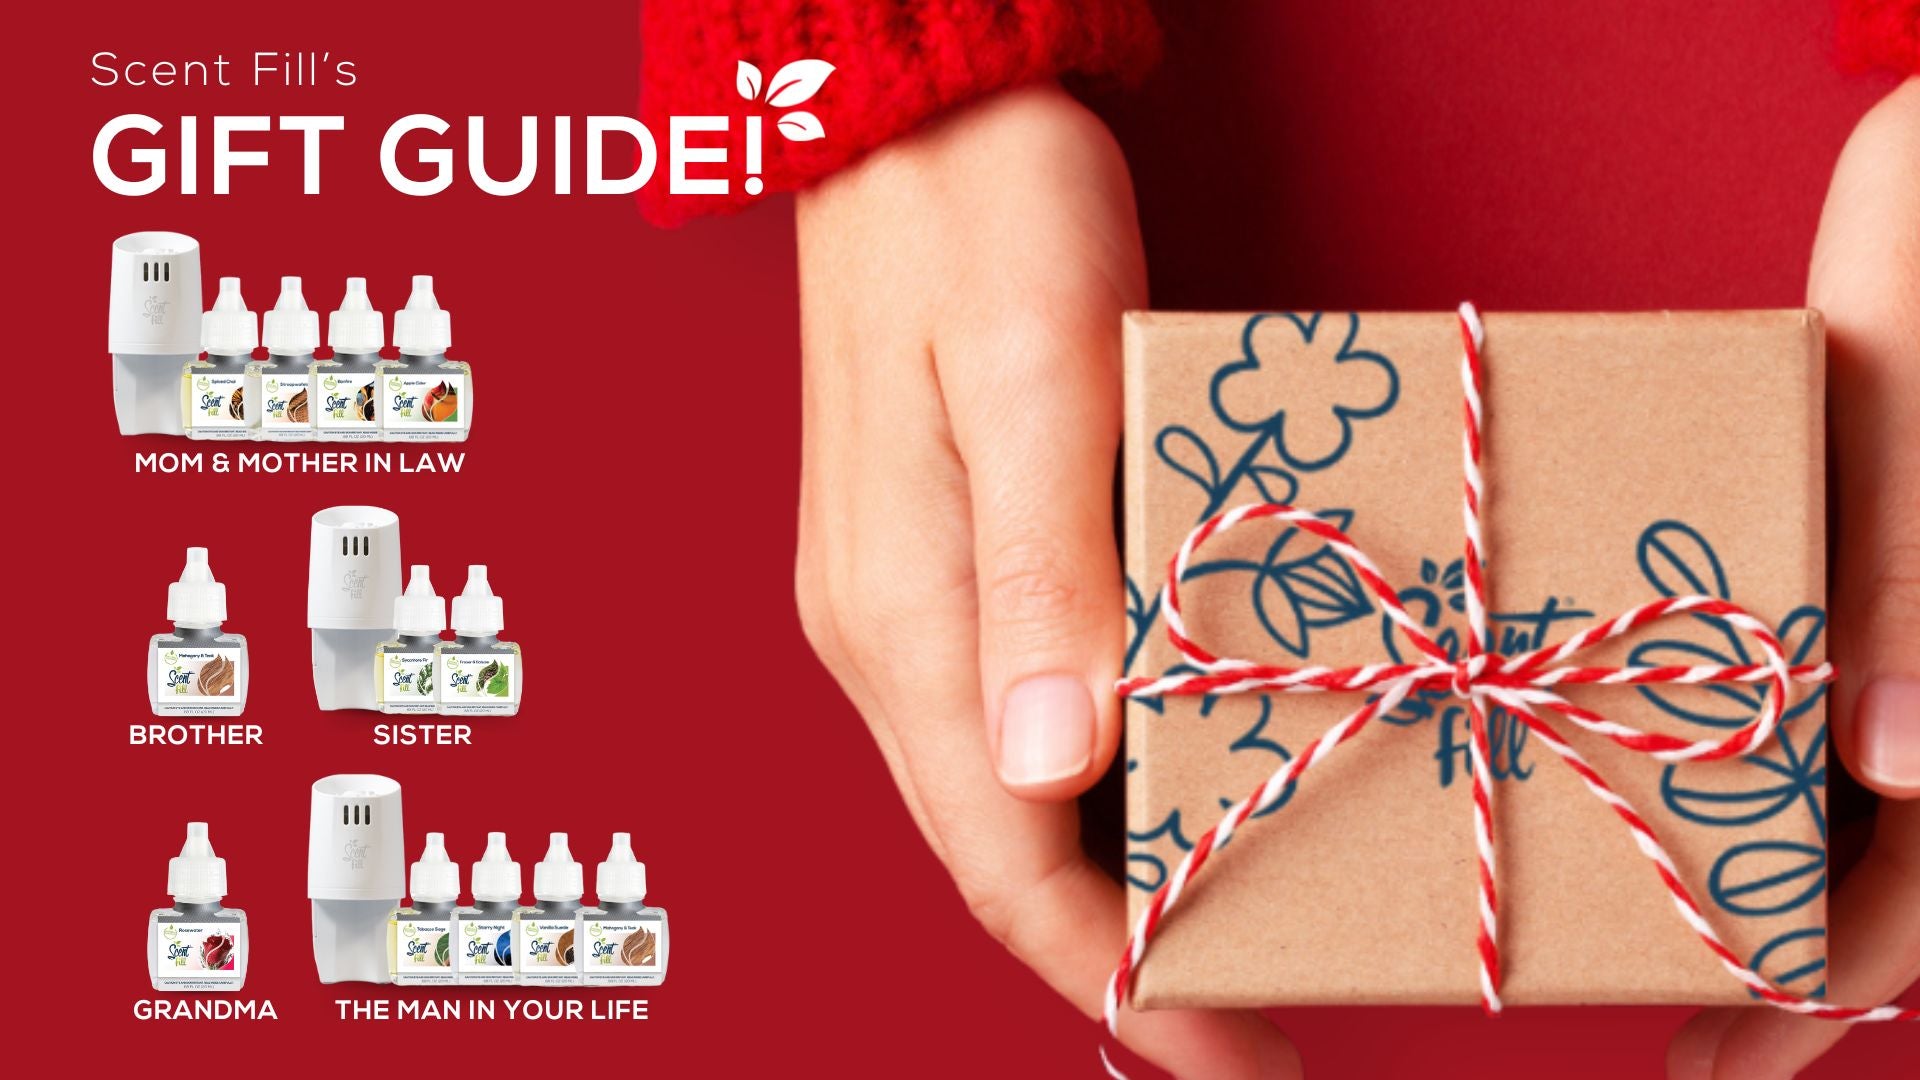 Scent Fill's Guide For The Hard To Buy For - 100% Natural Fragrance Gifts for Less Than $25